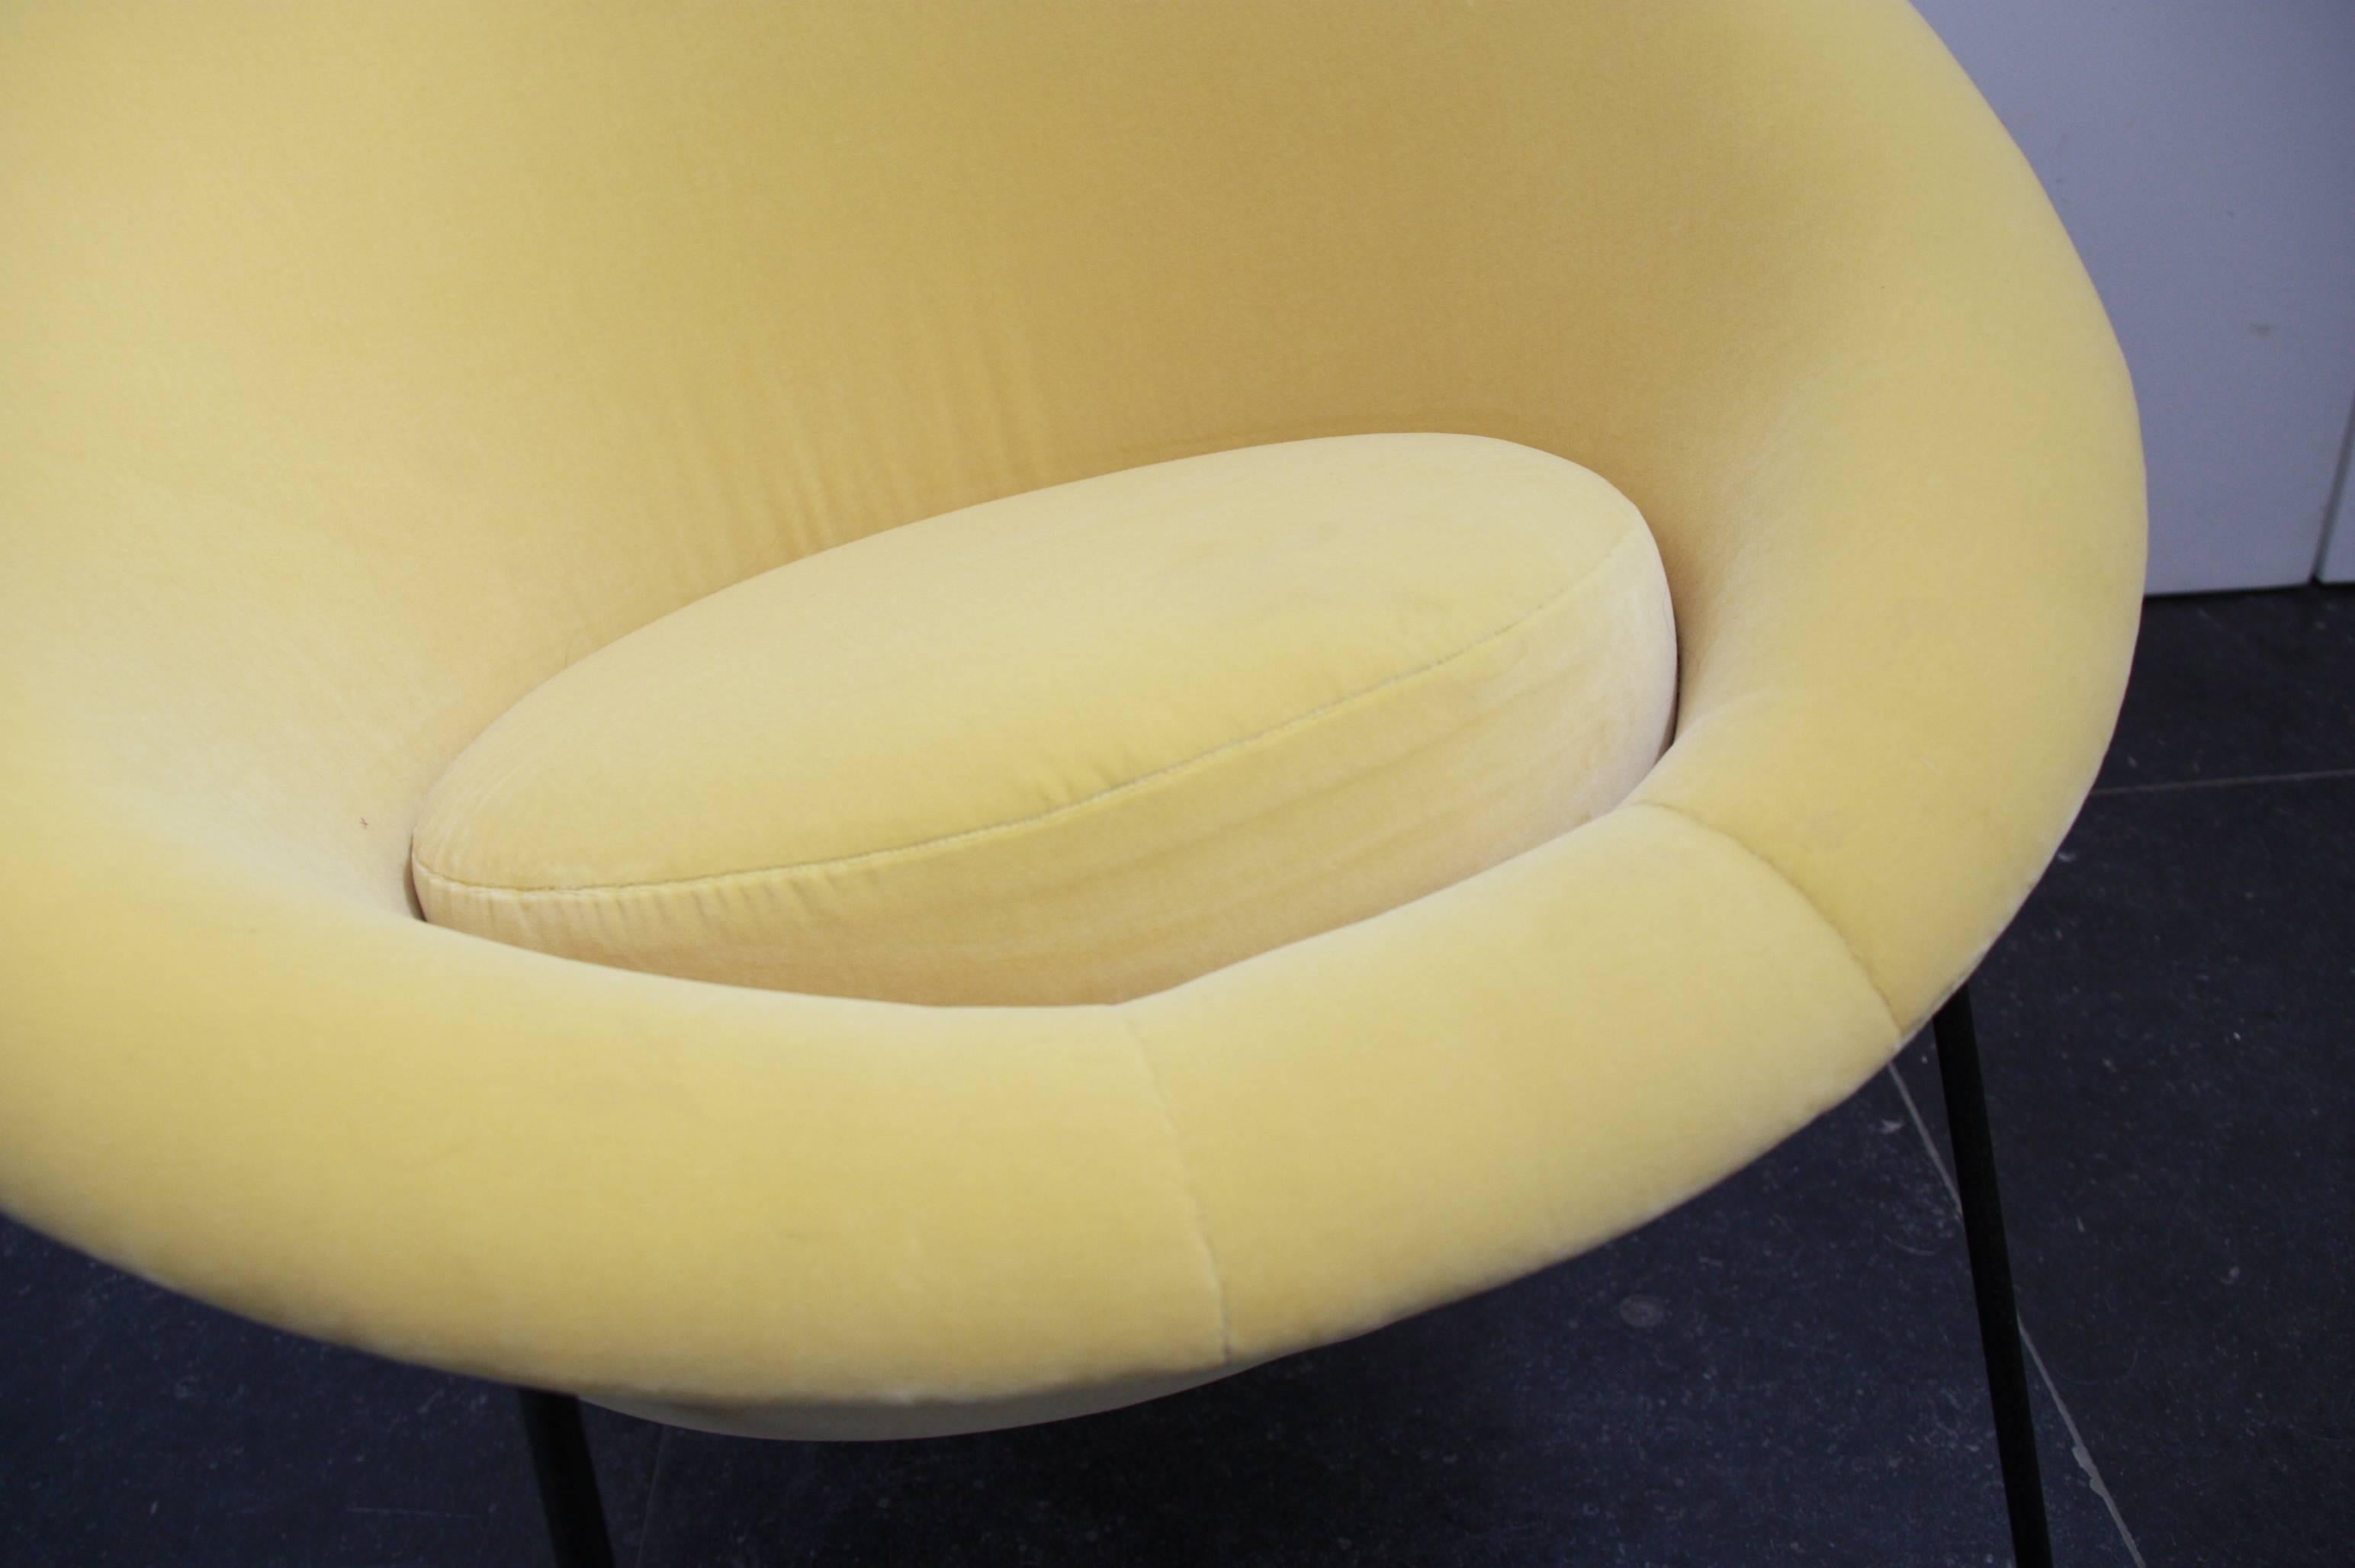 Italian Vintage Round Armchair Attributed to Vittorio Vigano, circa 1960 In Good Condition For Sale In Belgium, Brussels